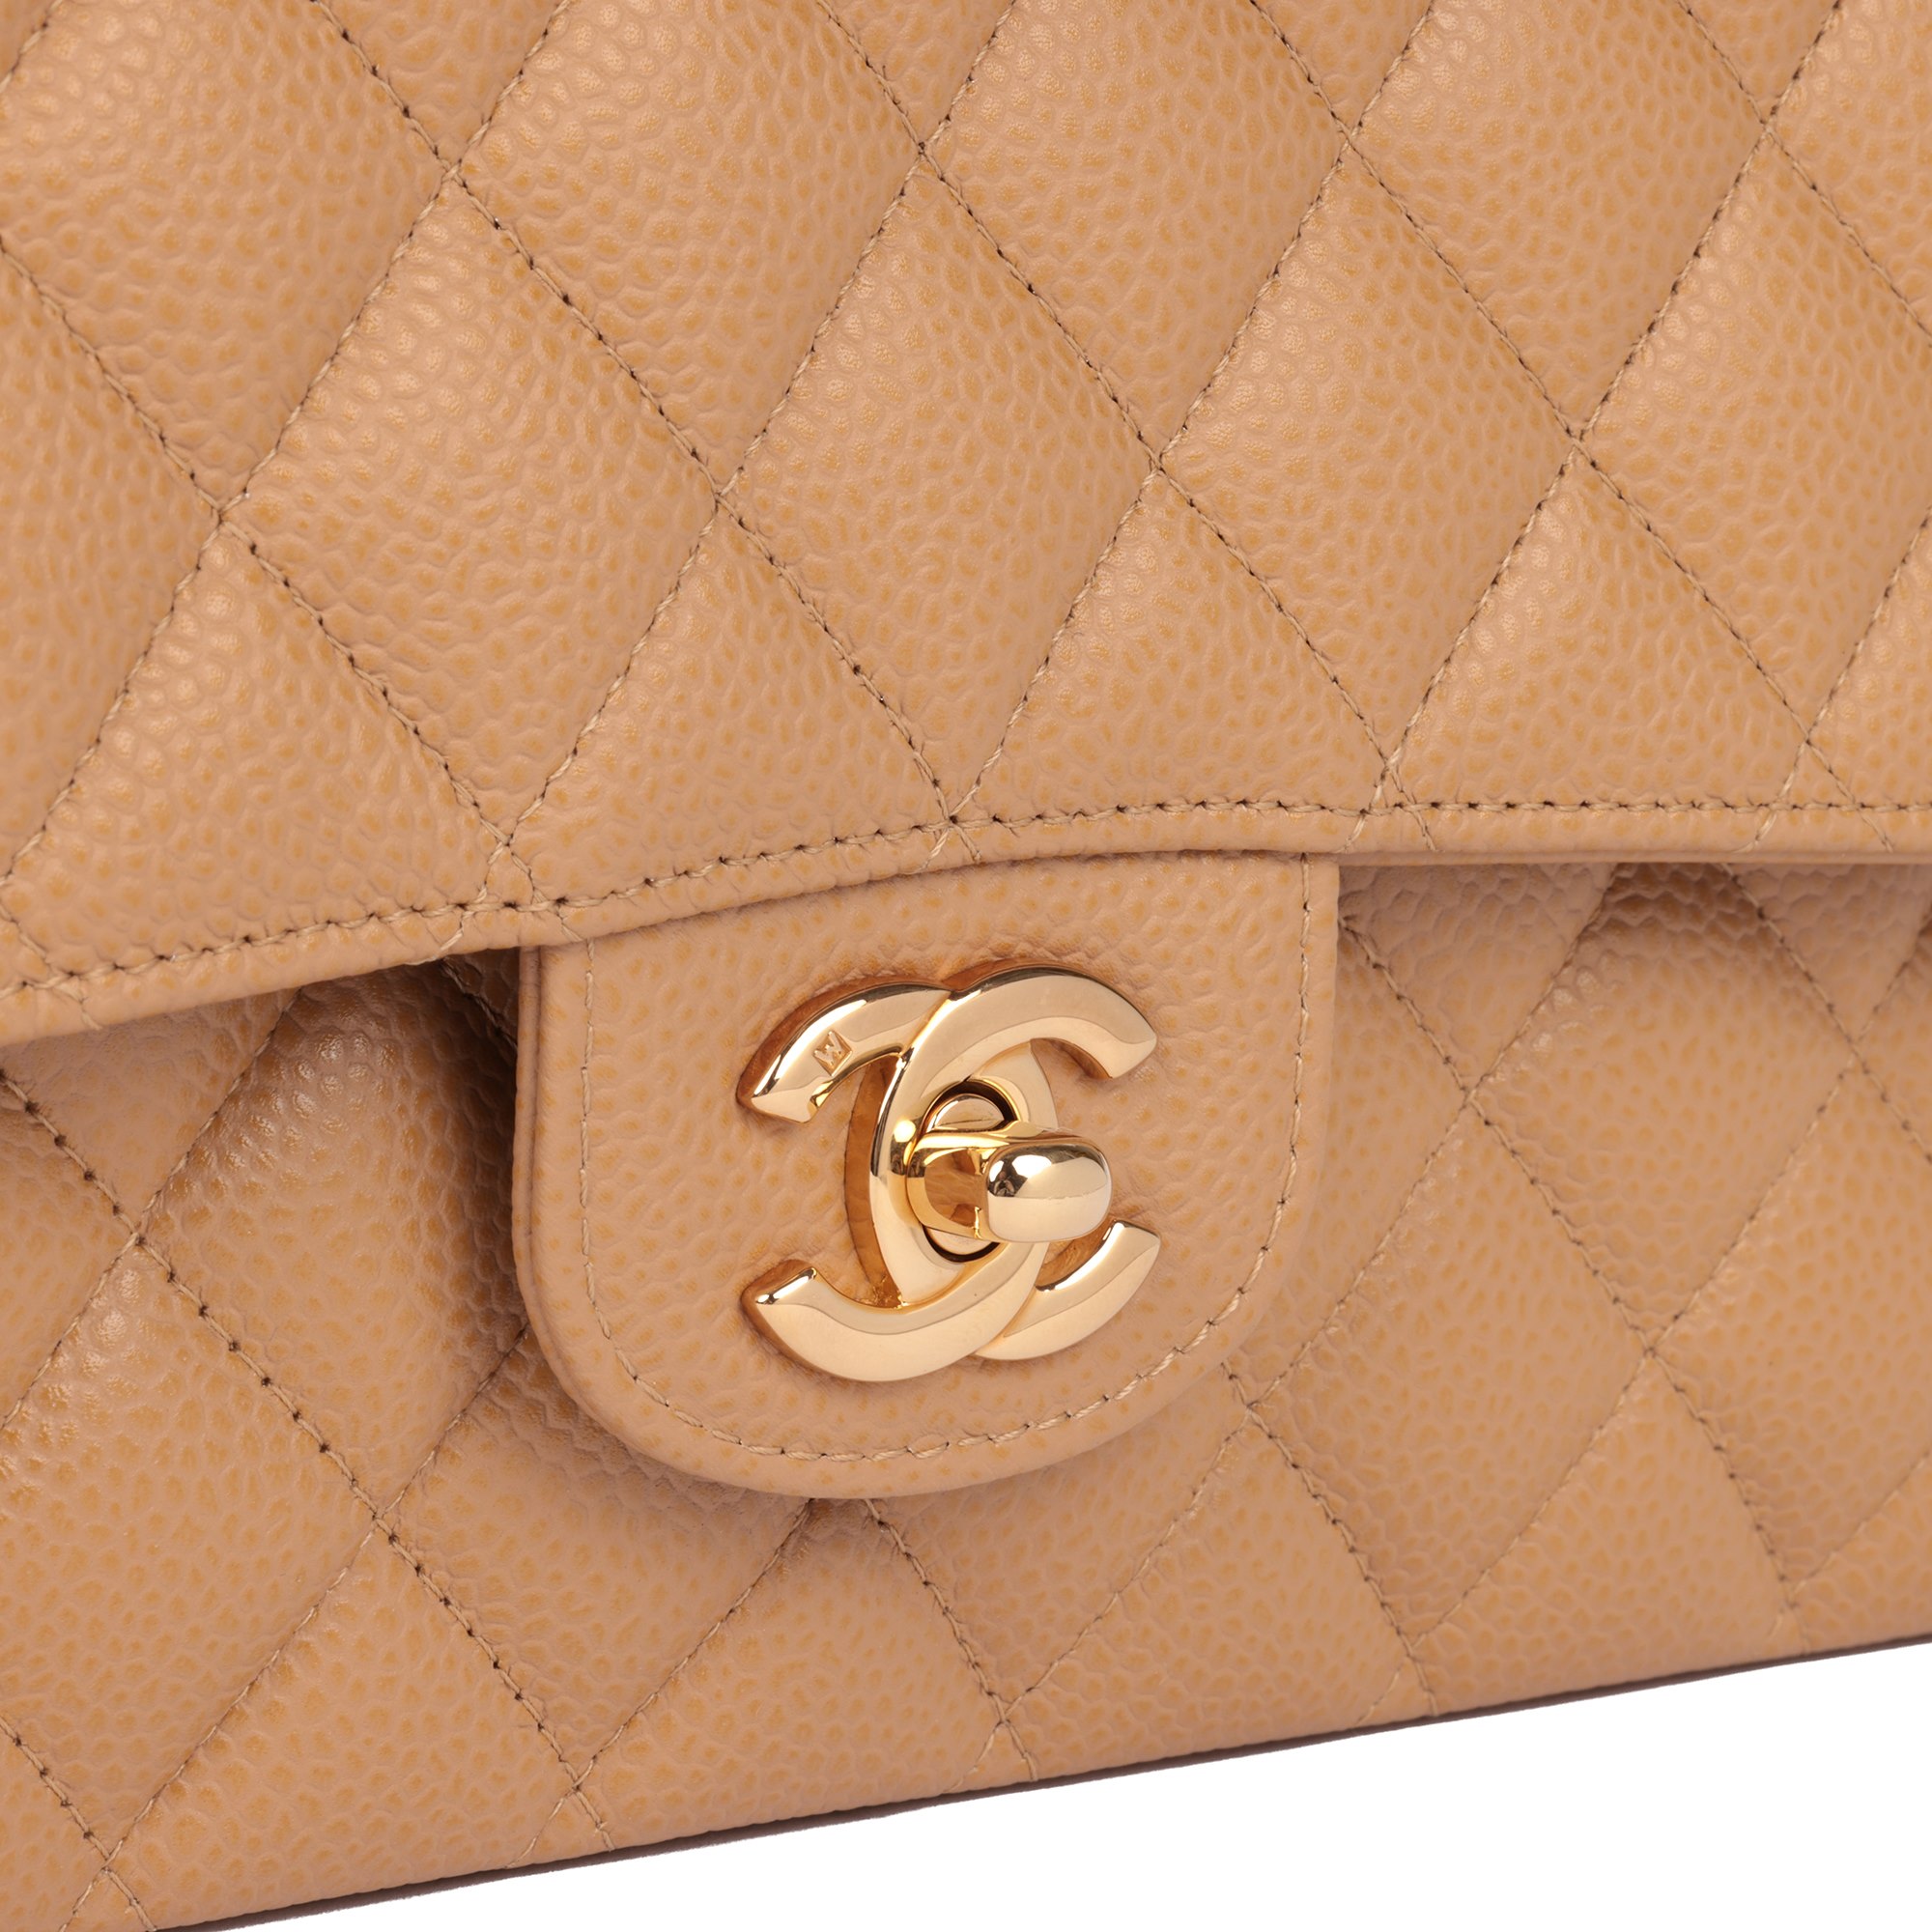 Chanel Beige Quilted Caviar Leather Classic Double Flap Bag